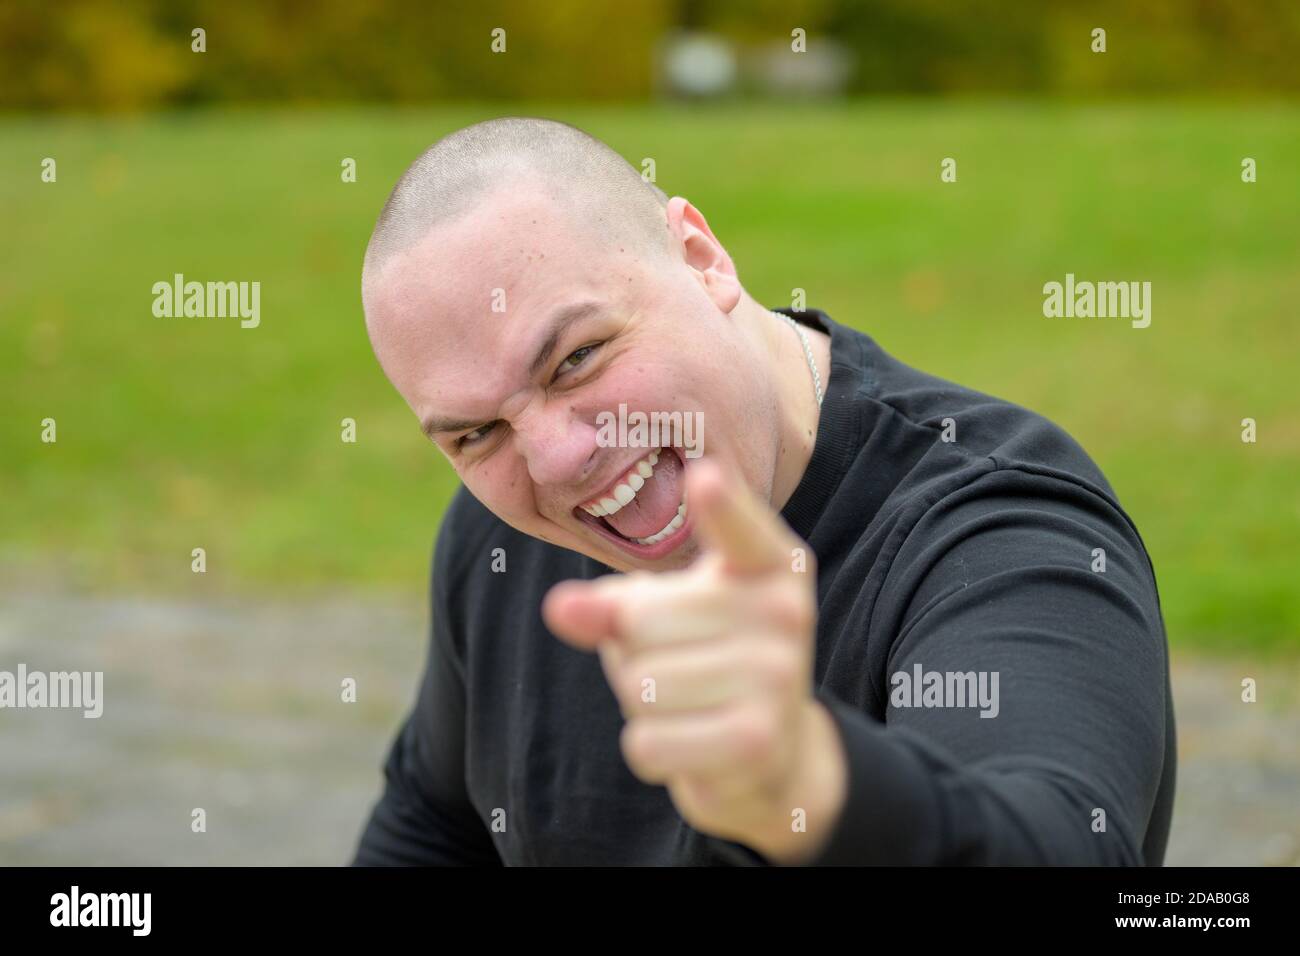 Angry man with shaved head pointing a finger of blame at the camera while voicing his aggression outdoors in a park Stock Photo